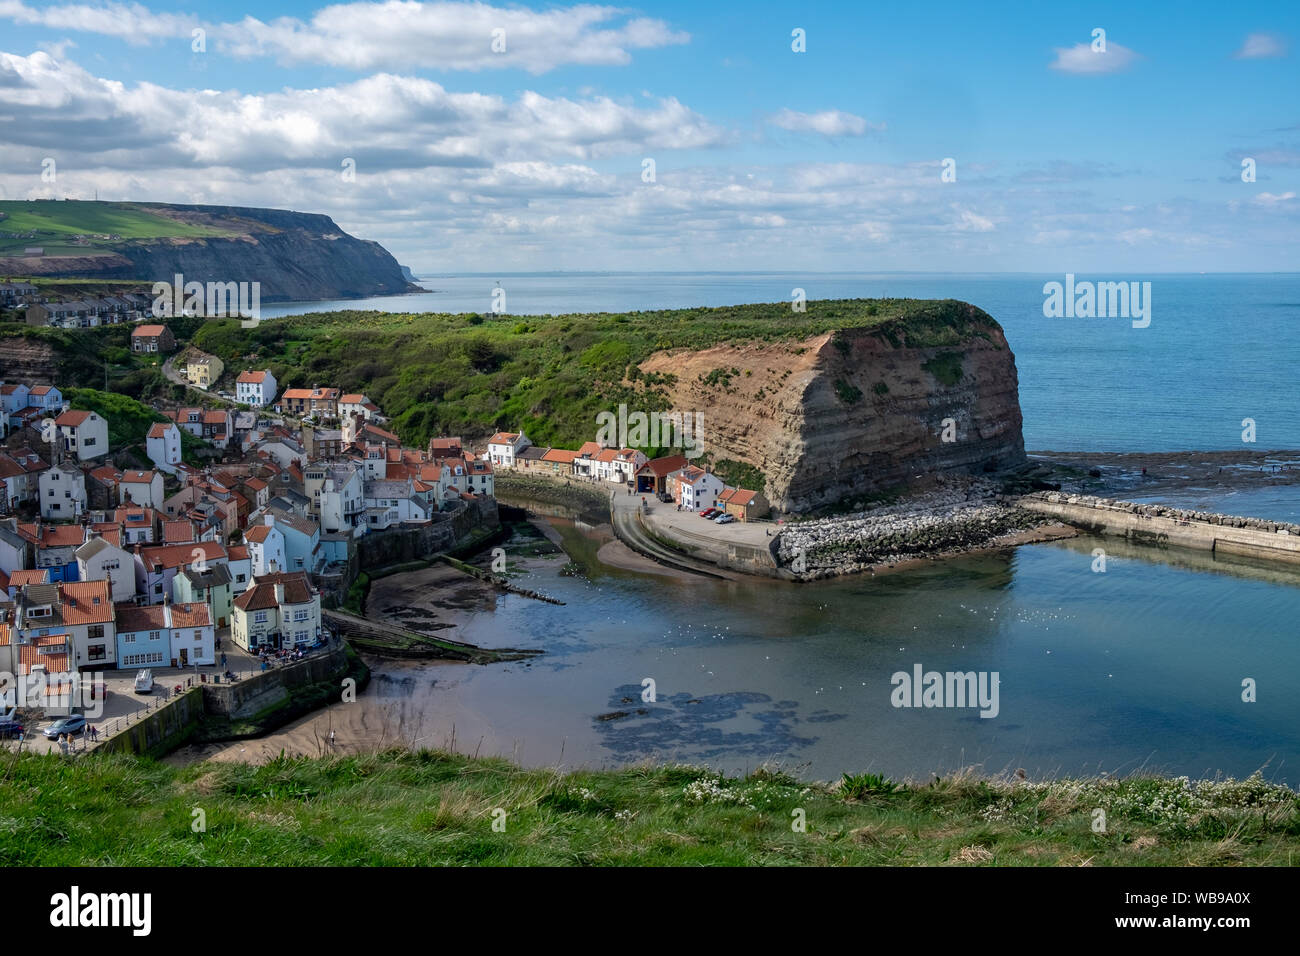 Panoramic view of Staithes, the Captain Cook's town, from Penny Nab, North Yorkshire, UK. Stock Photo